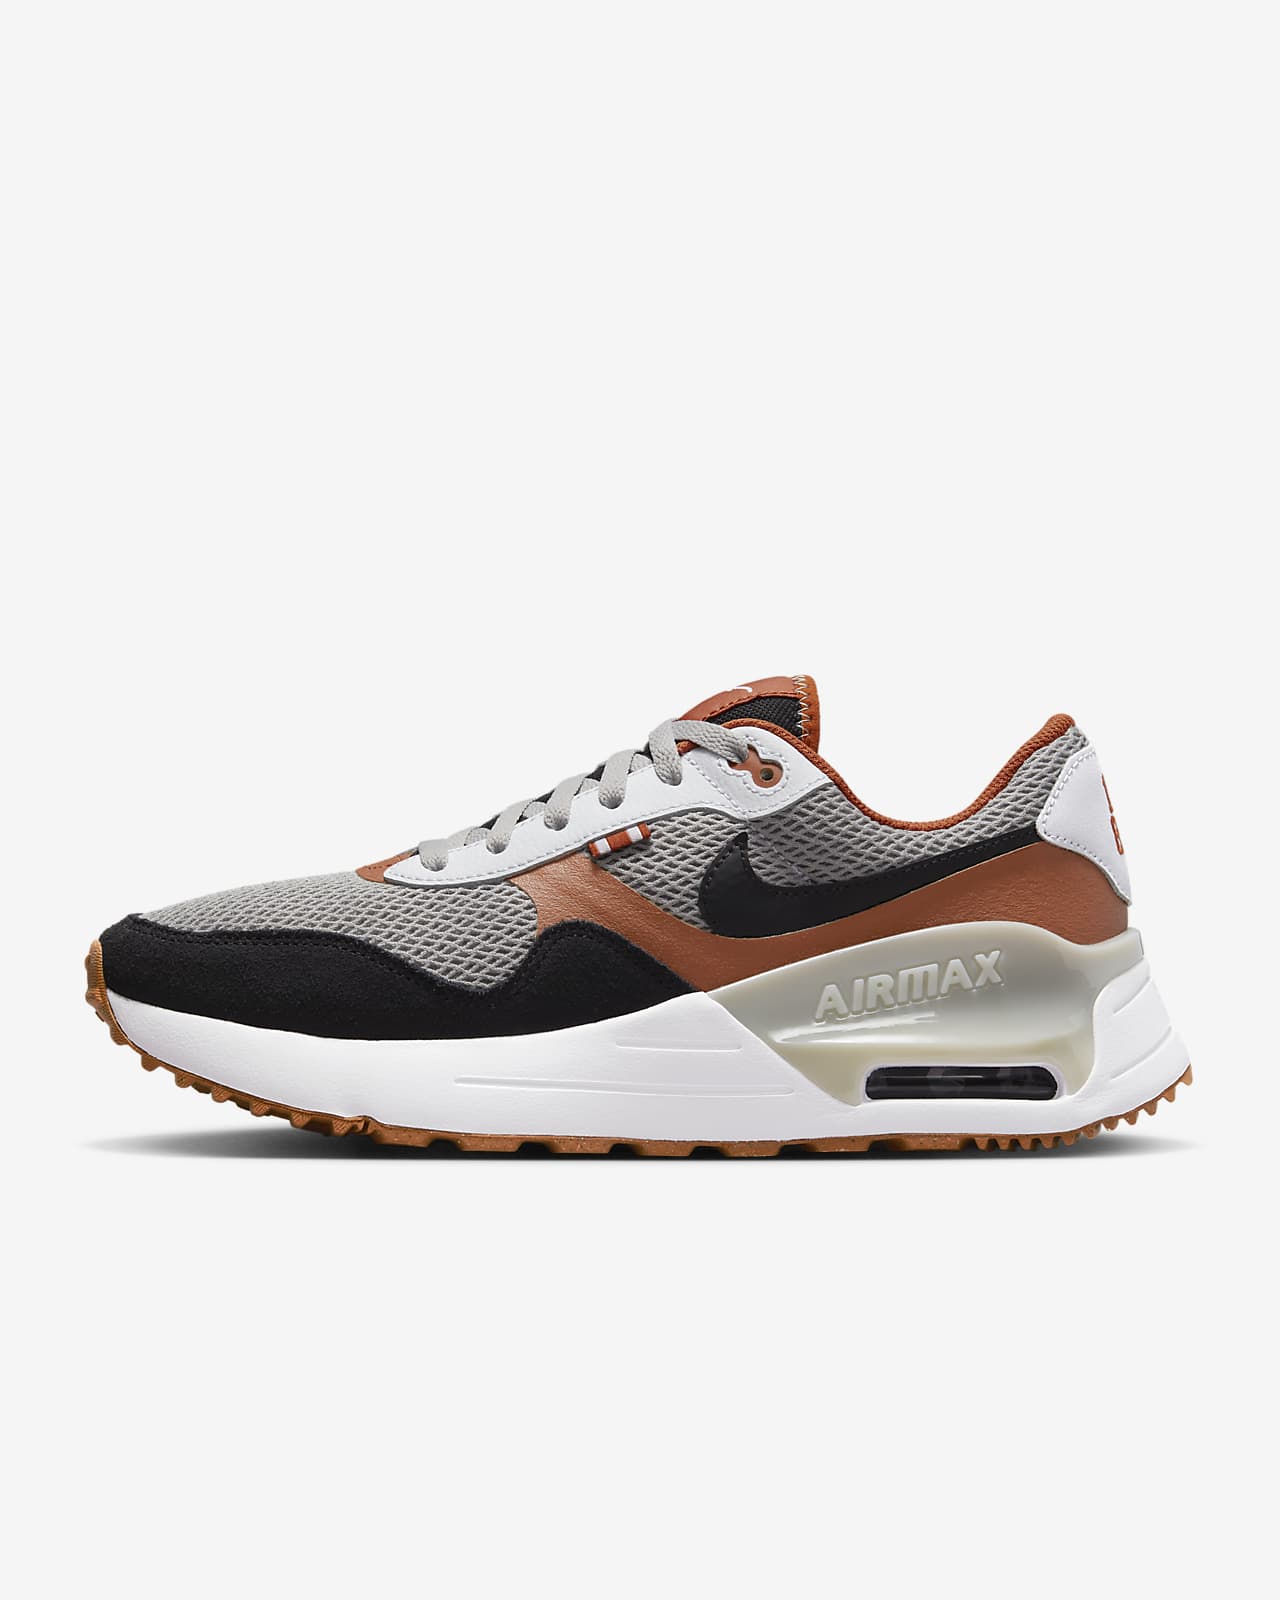 Nike College Air Max SYSTM (Texas) Men's Shoes